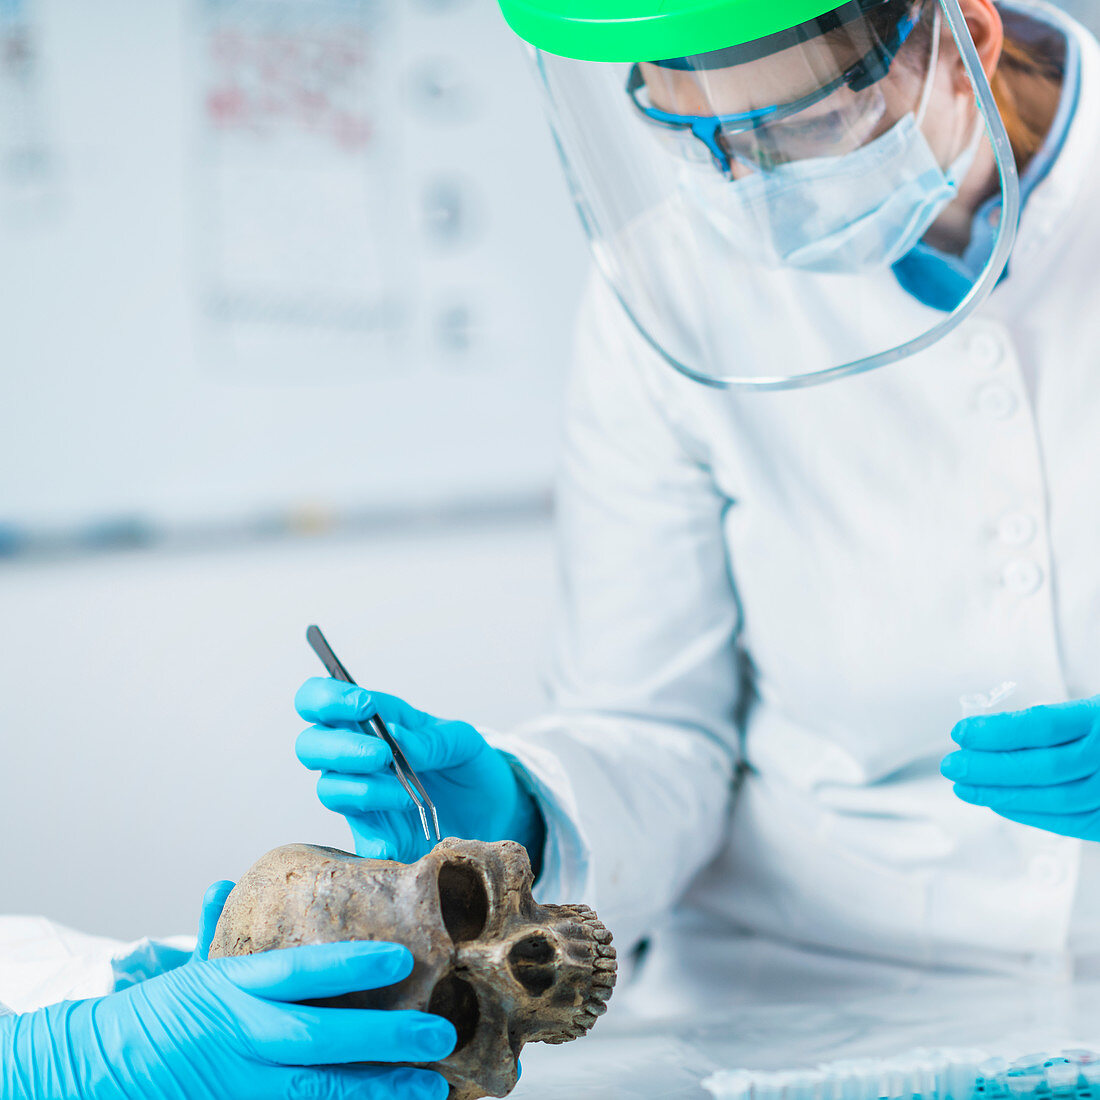 Archaeologist analyzing ancient human skull